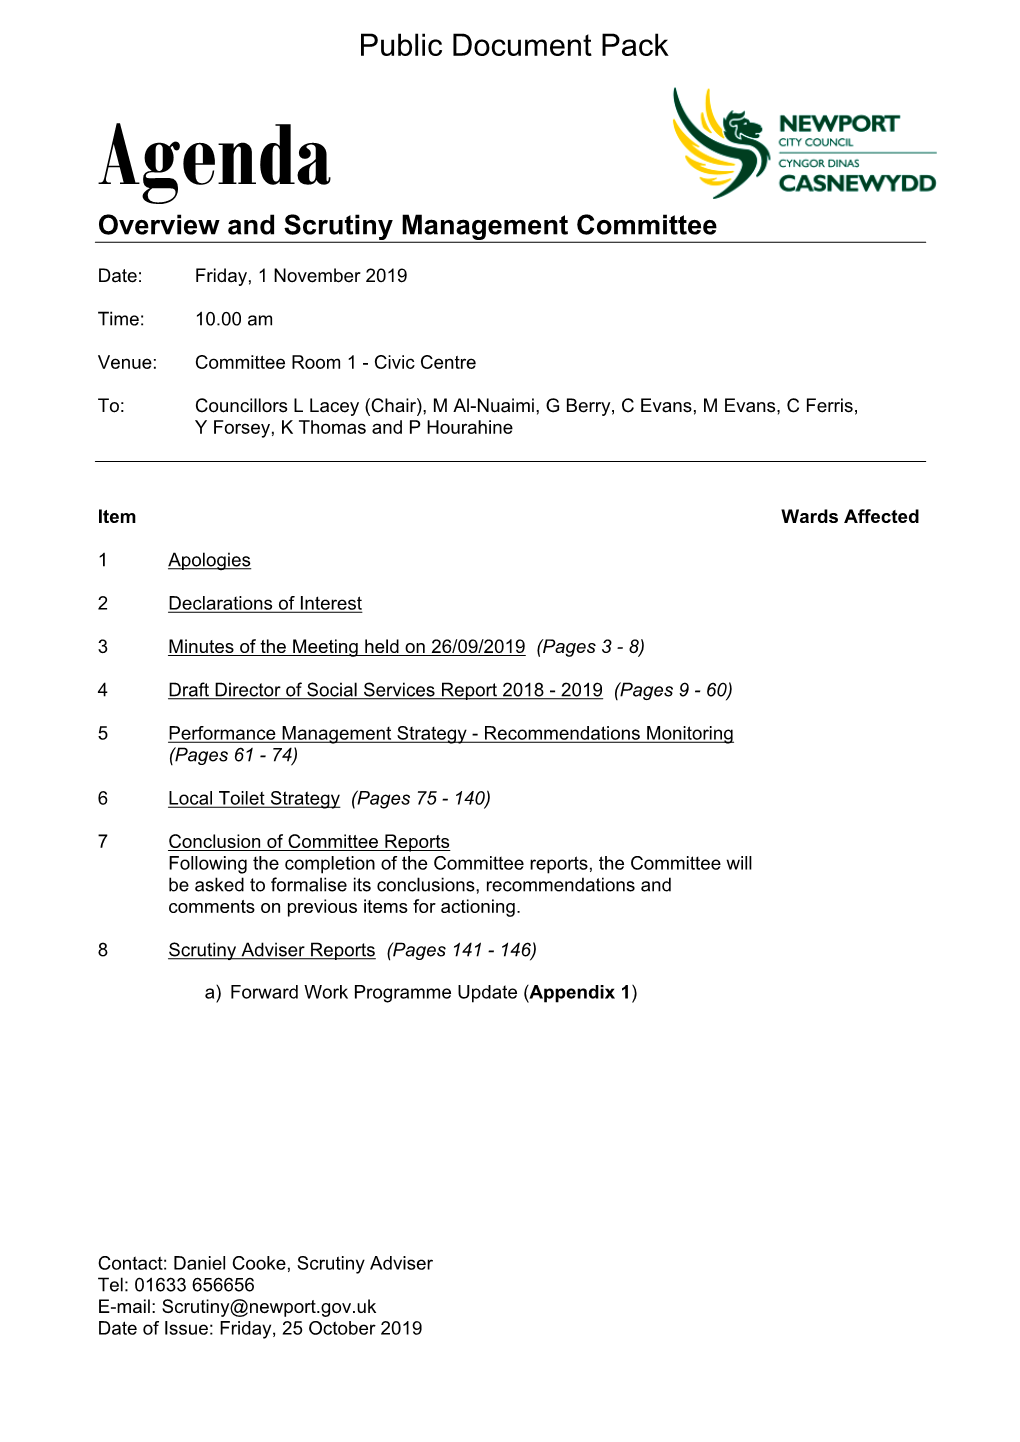 (Public Pack)Agenda Document for Overview and Scrutiny